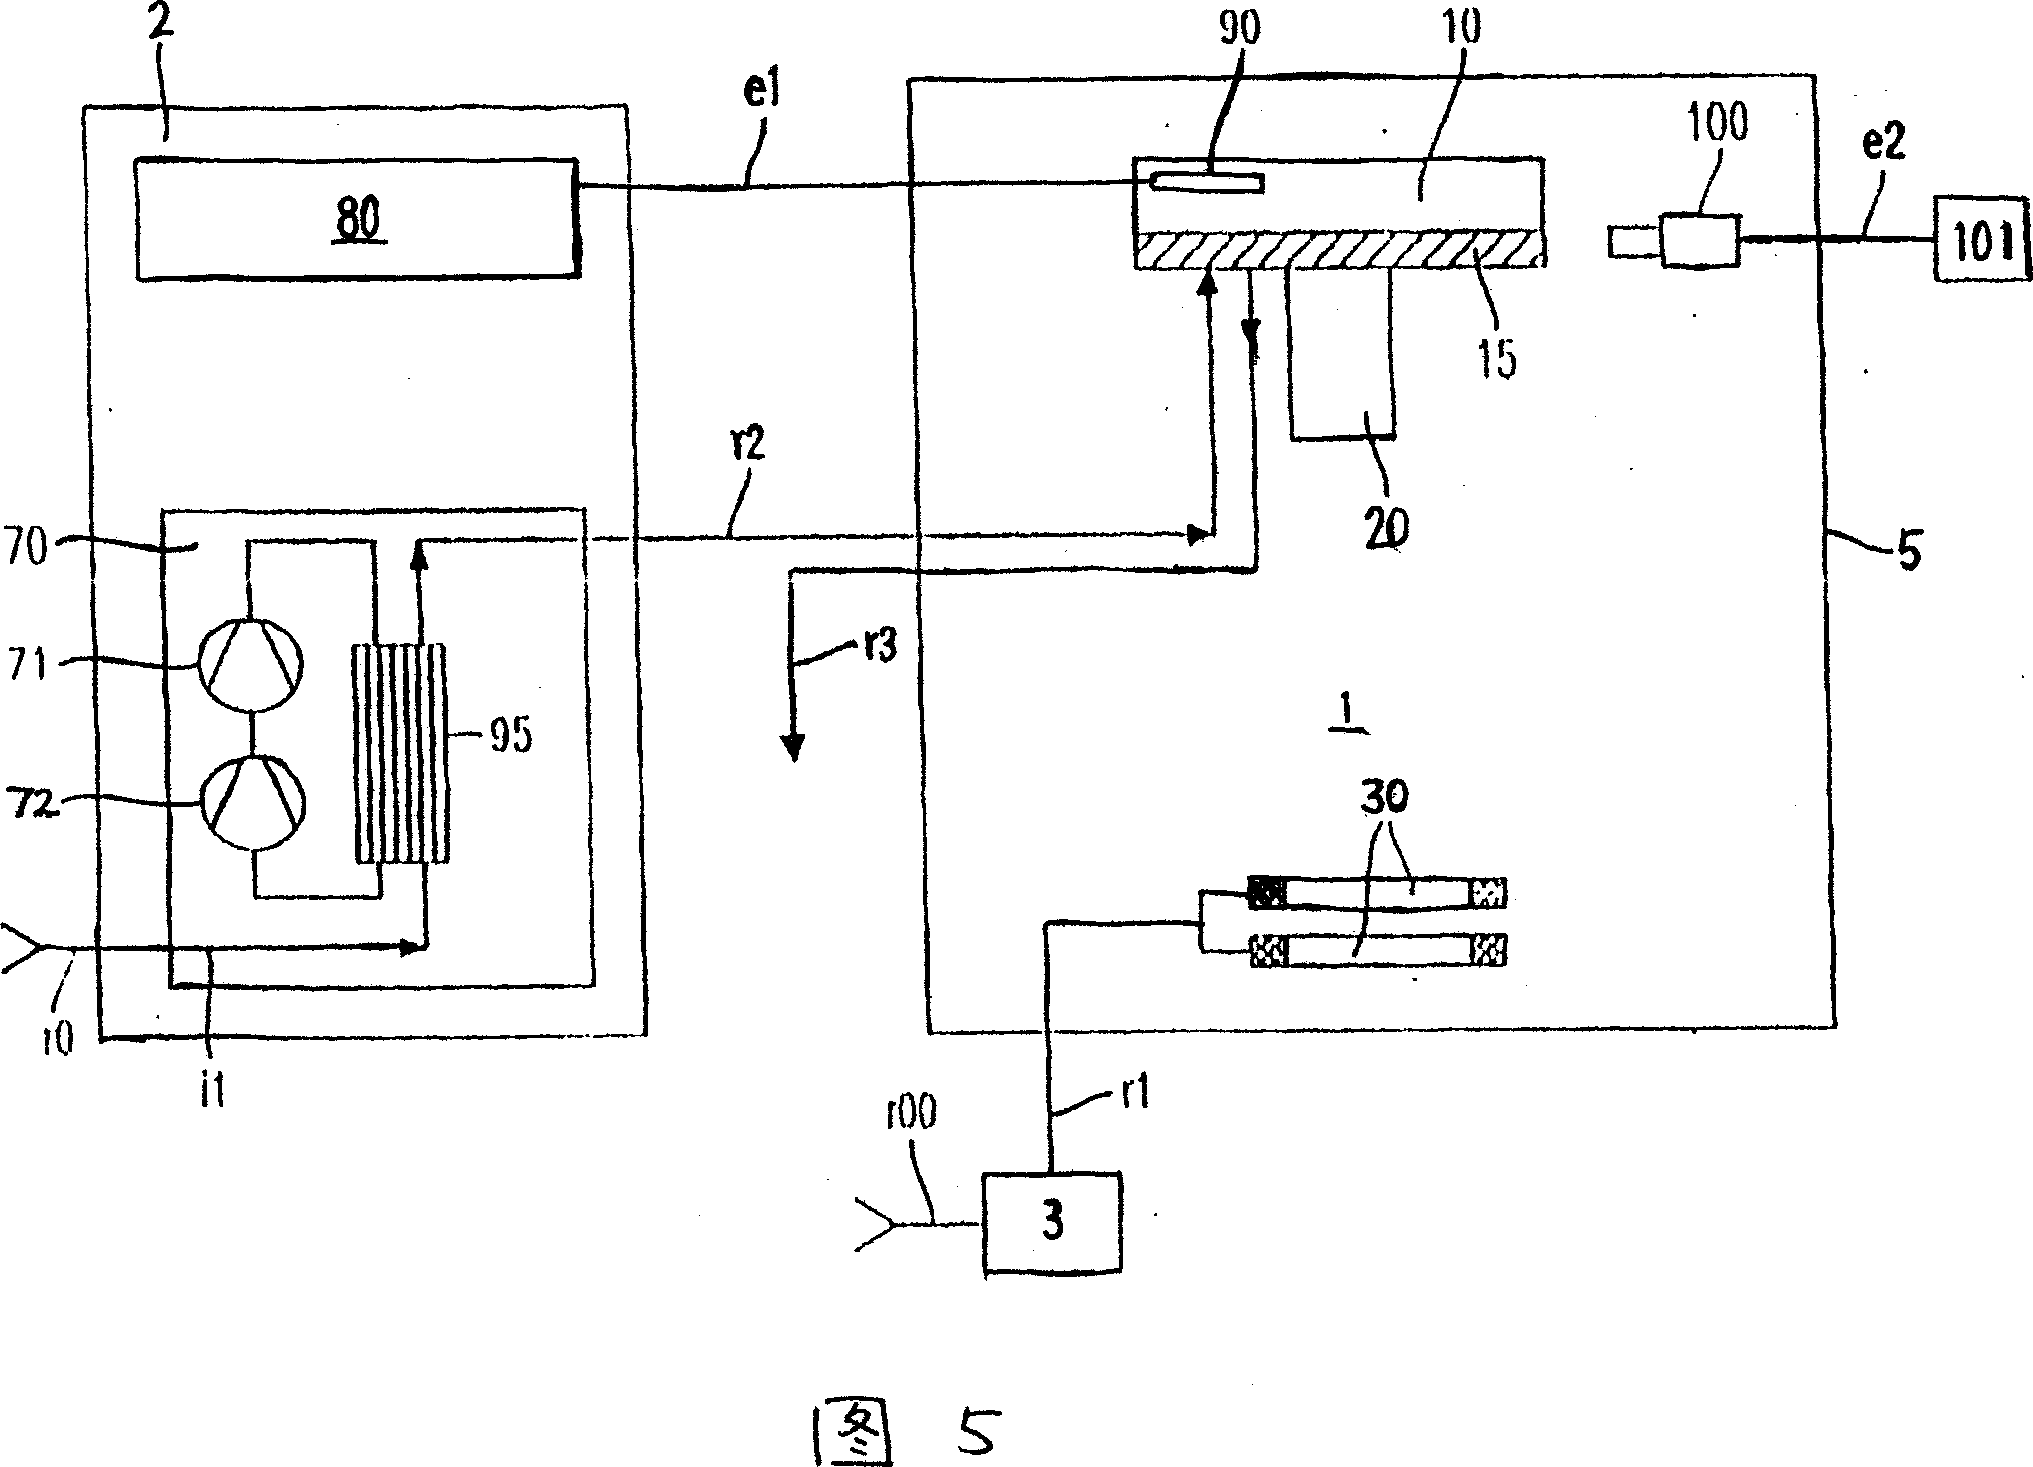 Method and device for conditioning semiconductor wafers and/or hybrids